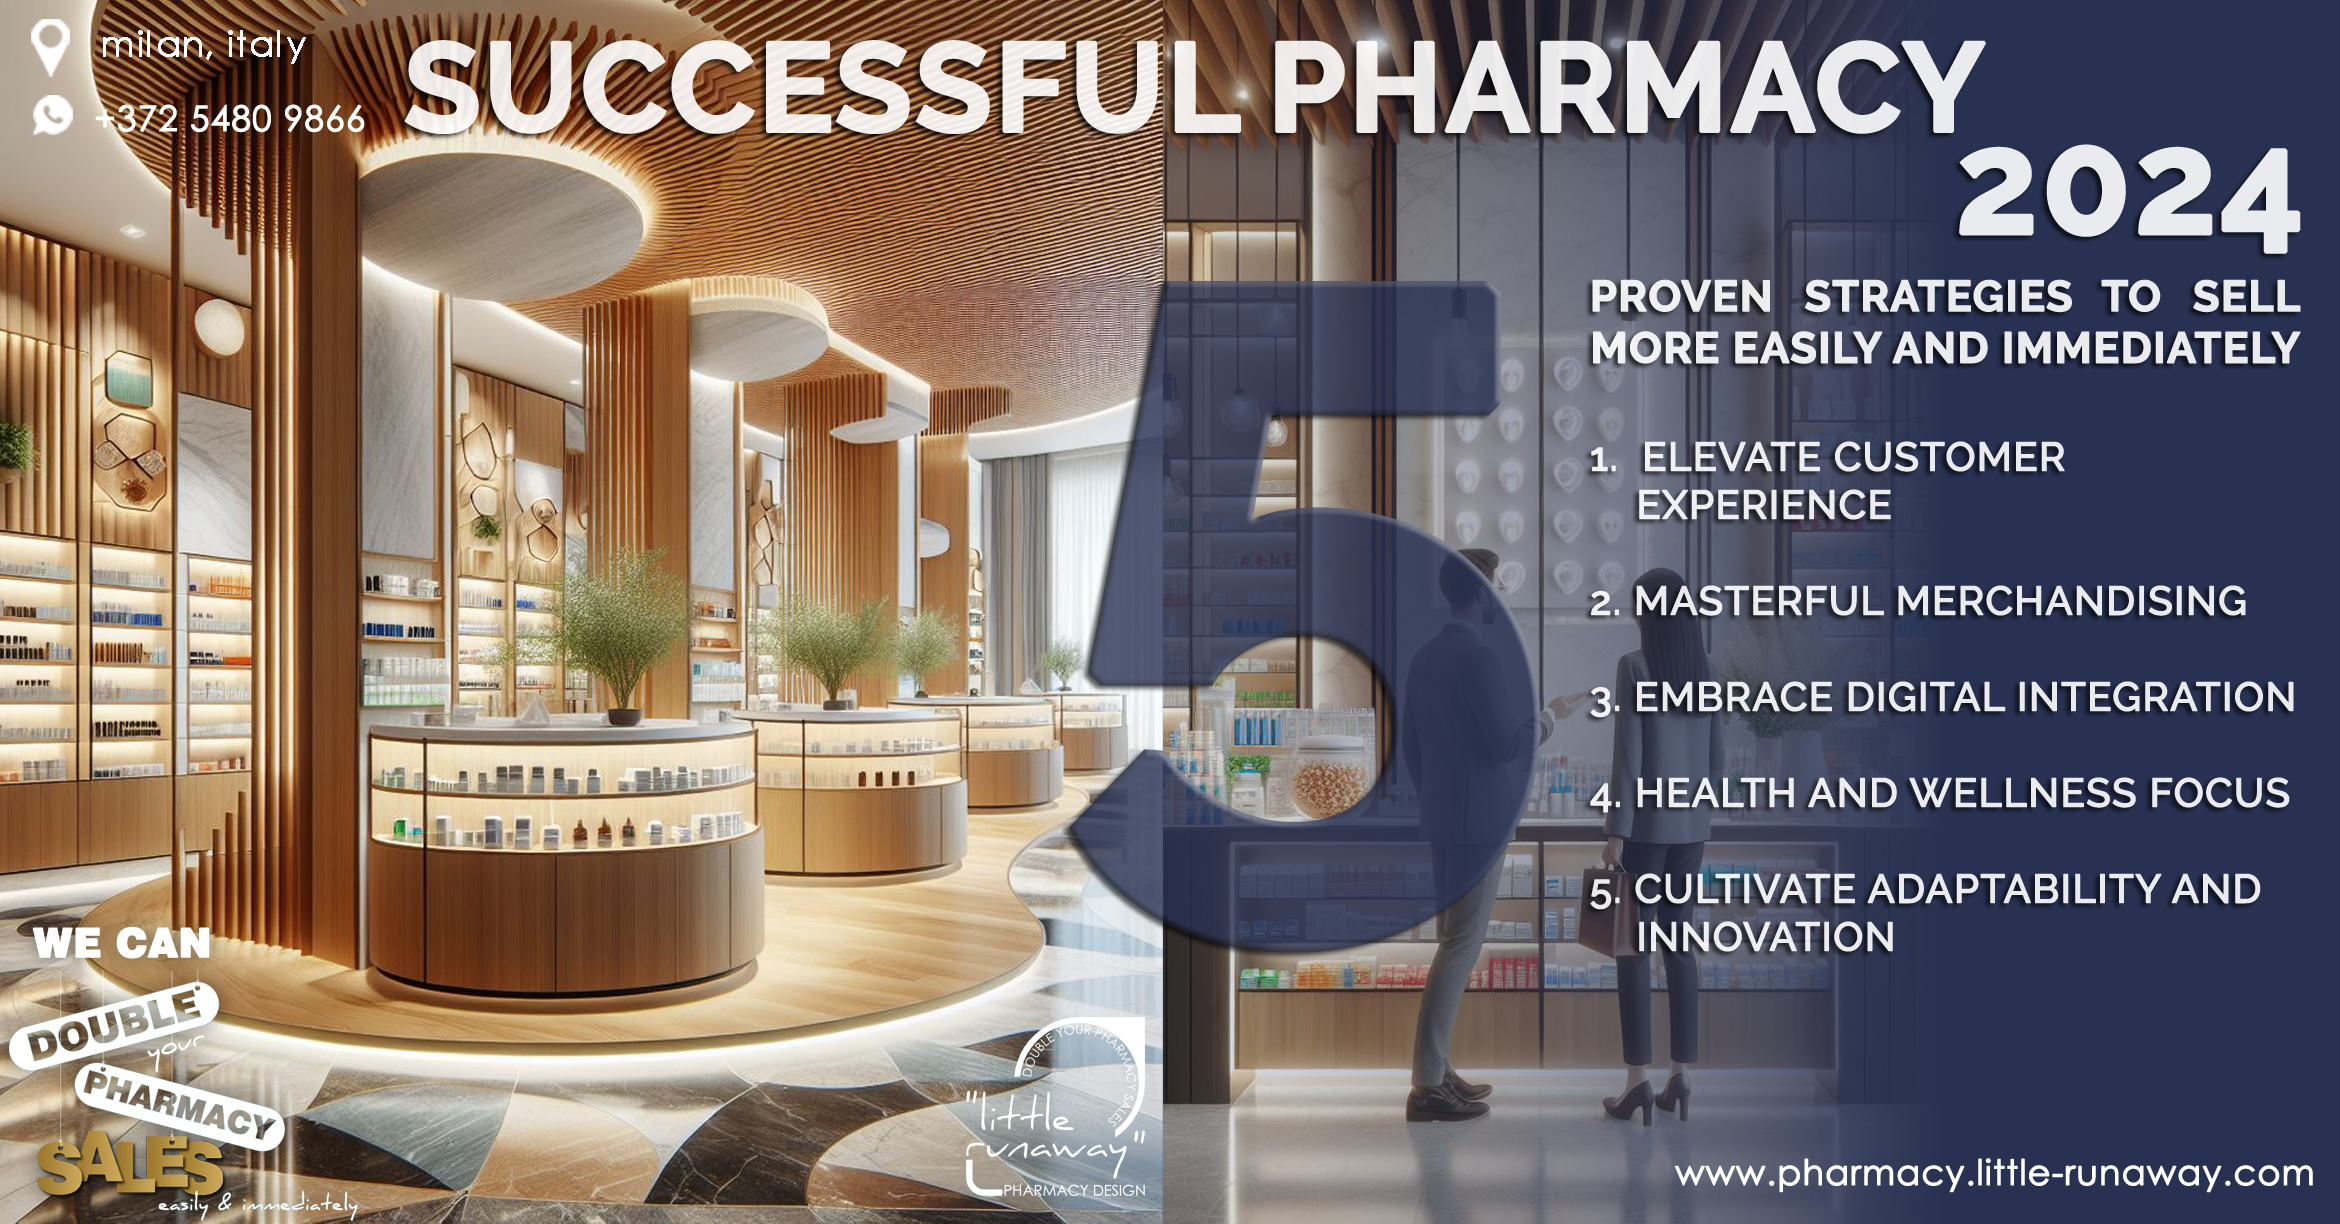 Pharmacy design forecast 2024 to improve sales and increase customer footfall